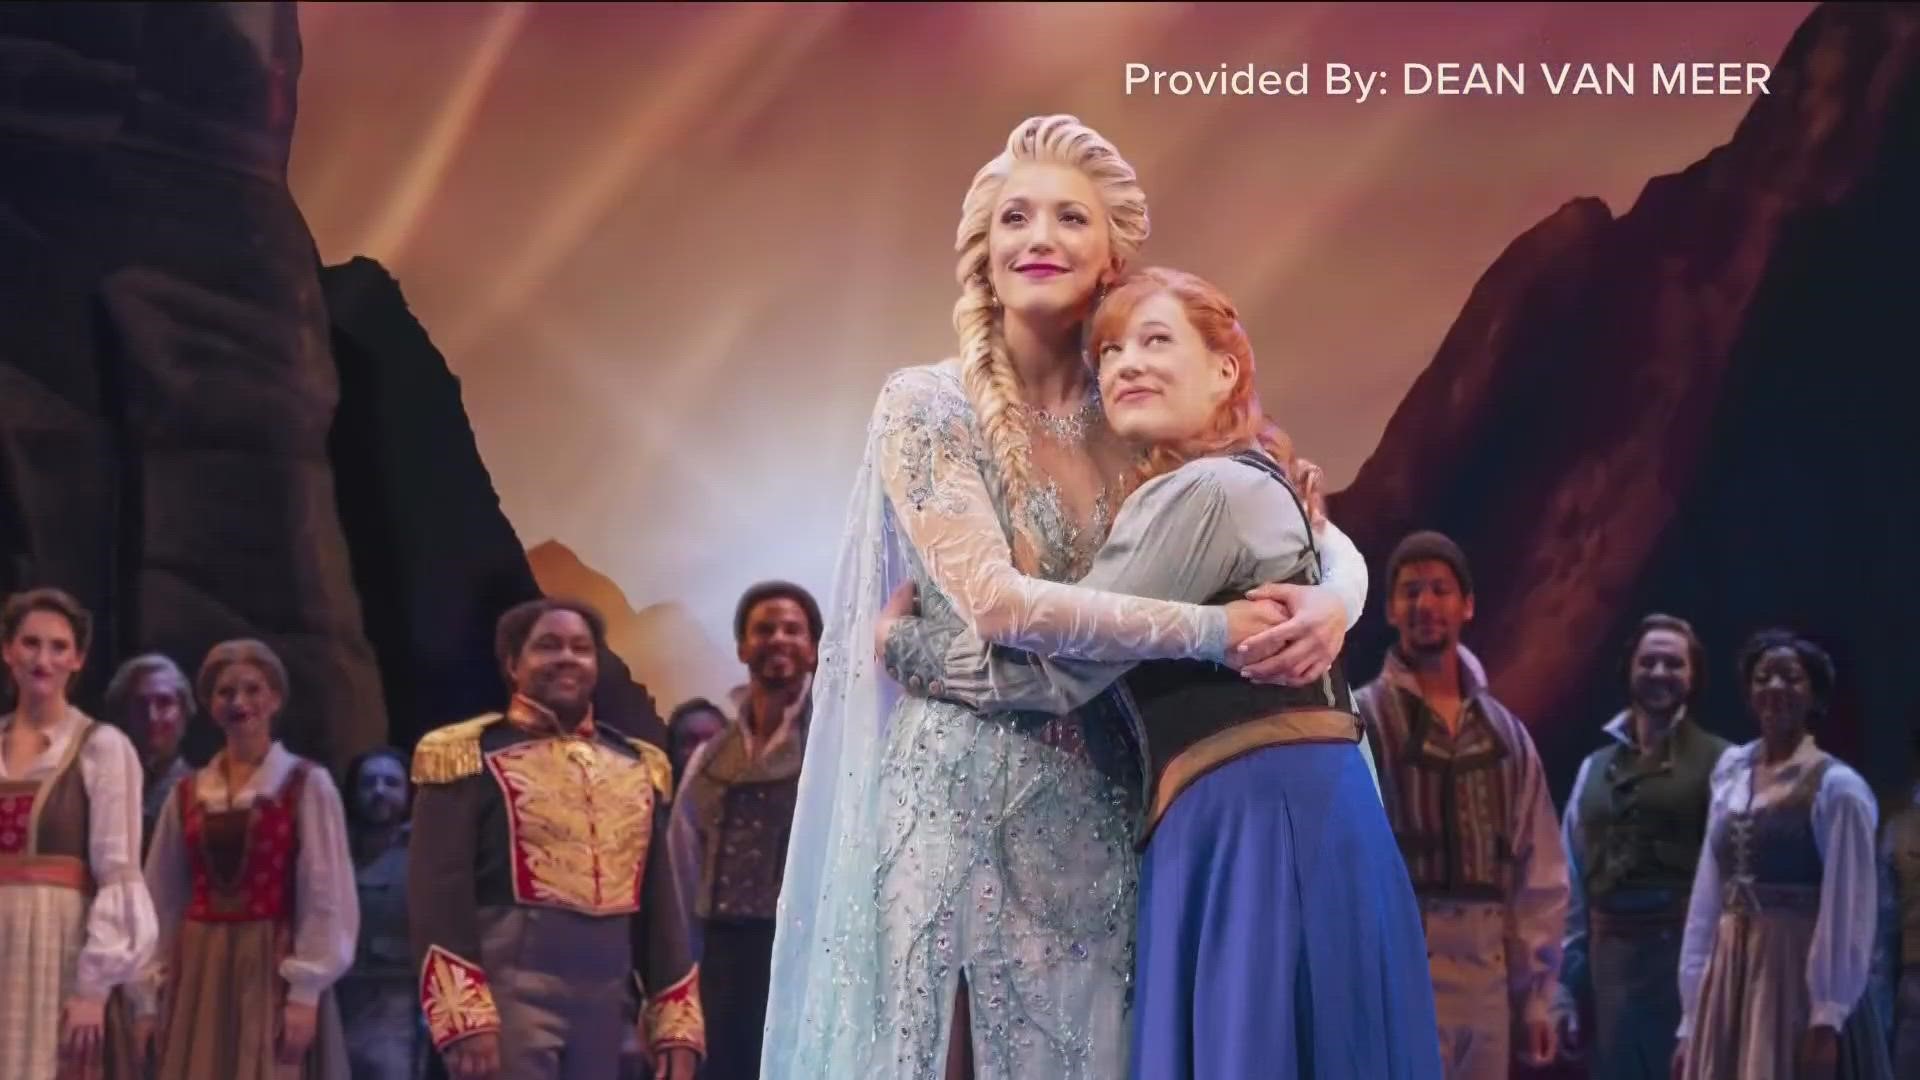 Meet the award-winning musical's two lead actors who play Elsa and Anna.